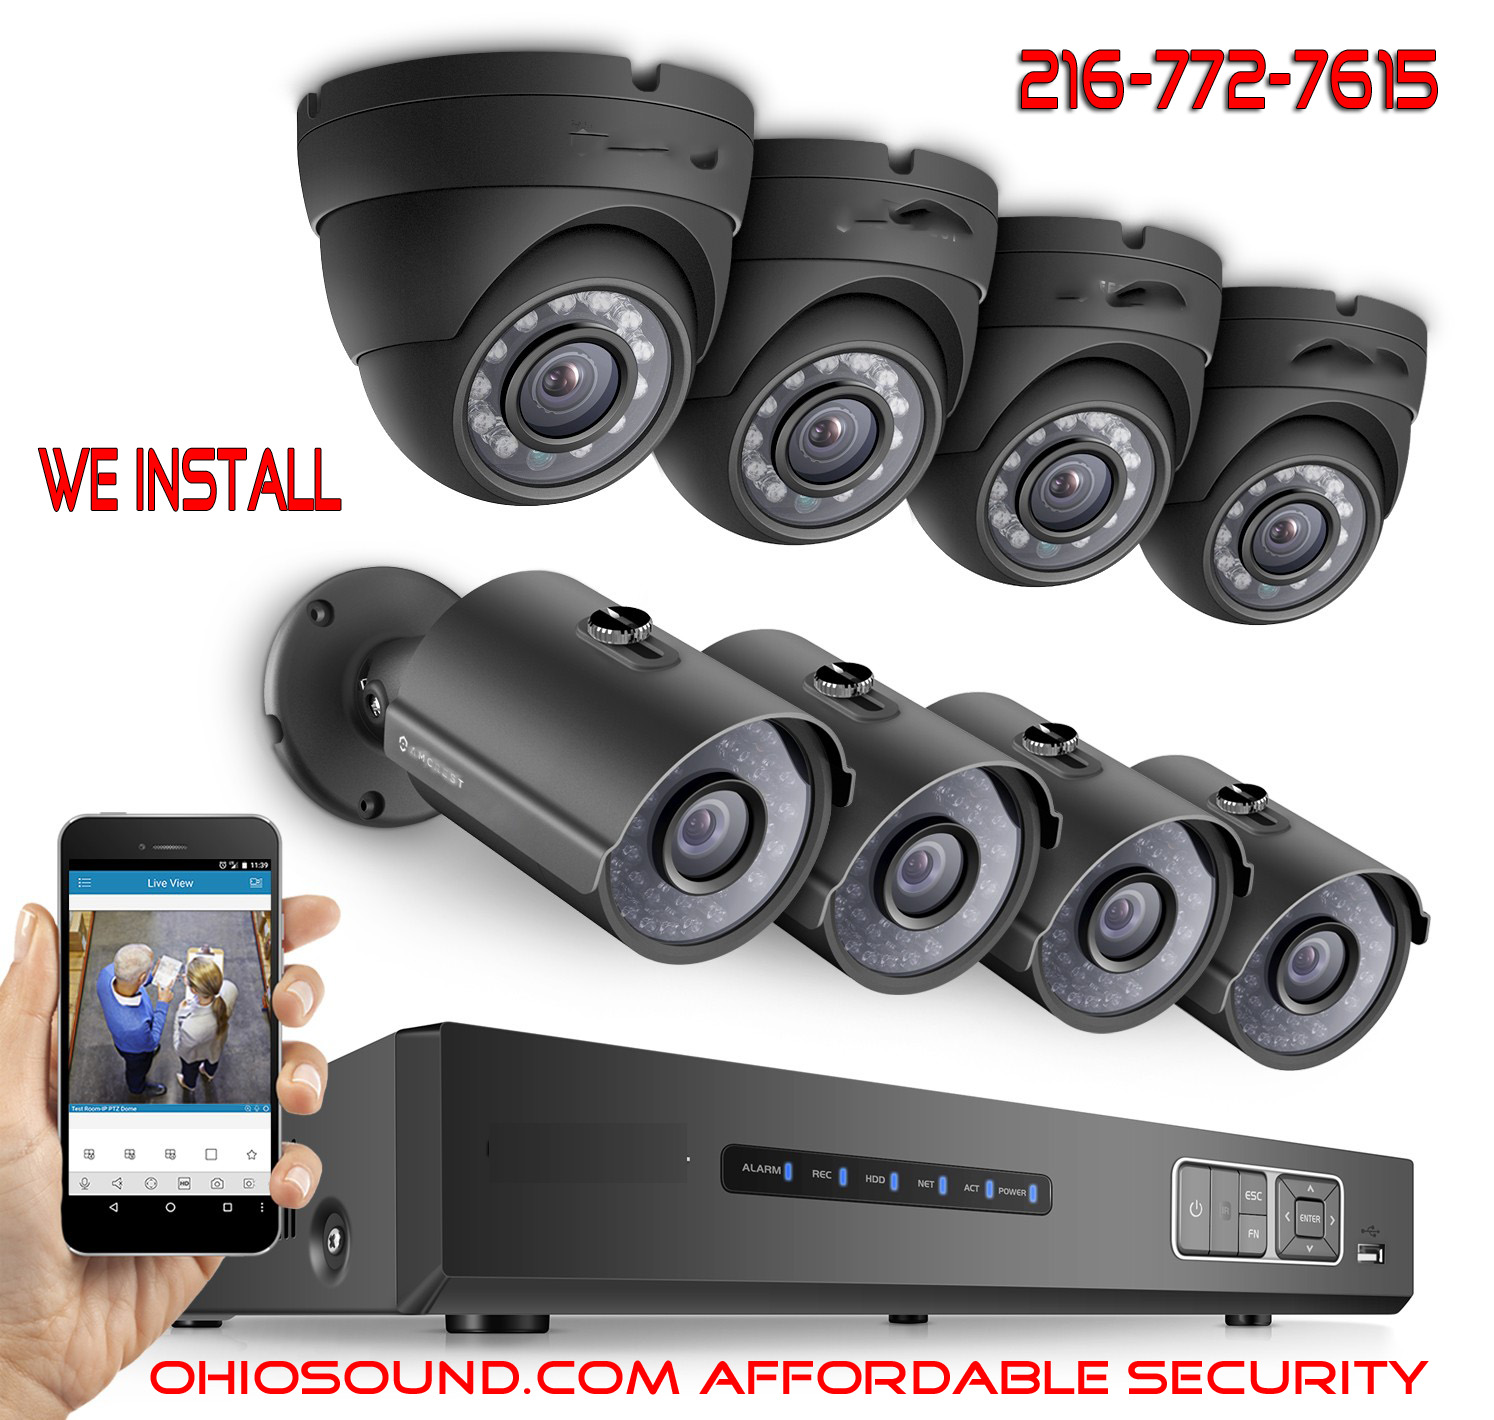 Small business security camera system Cleveland OH